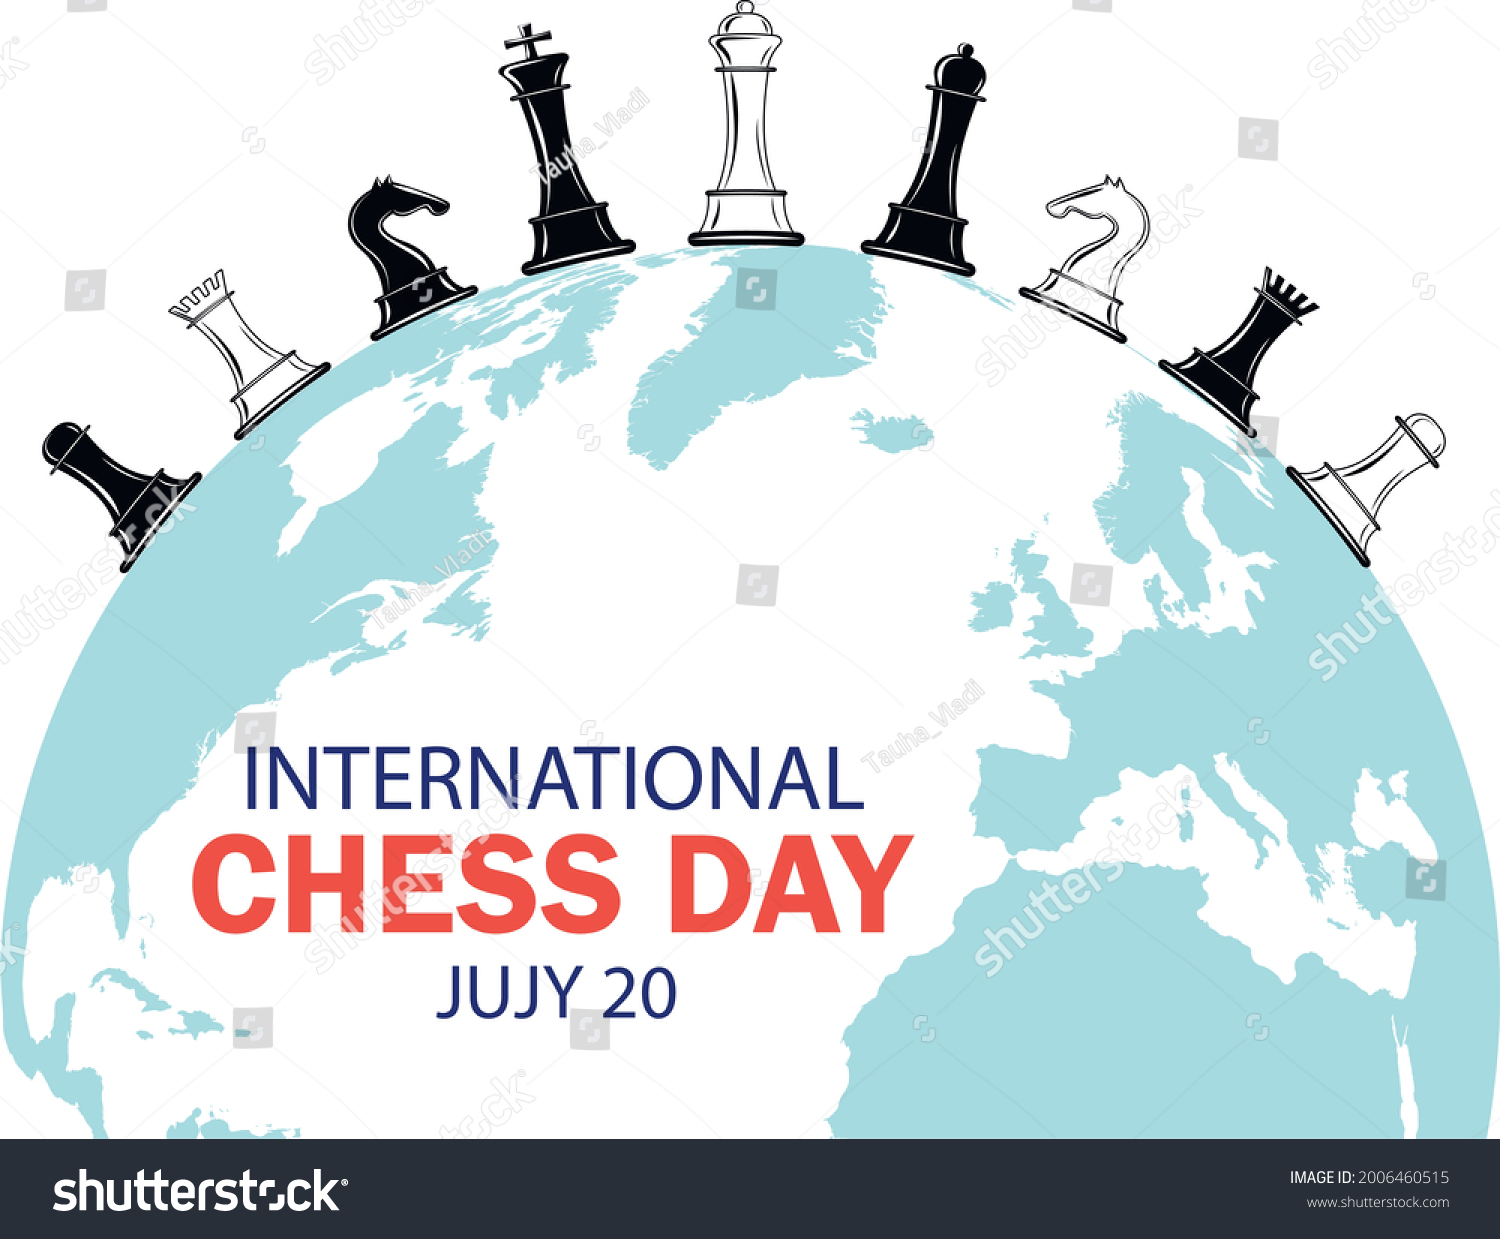 SVG of Design for International Chess Day.
Planet Earth, on which various chess pieces are located, as a symbol of an international holiday and the fact that the game of chess is known all over the world. svg